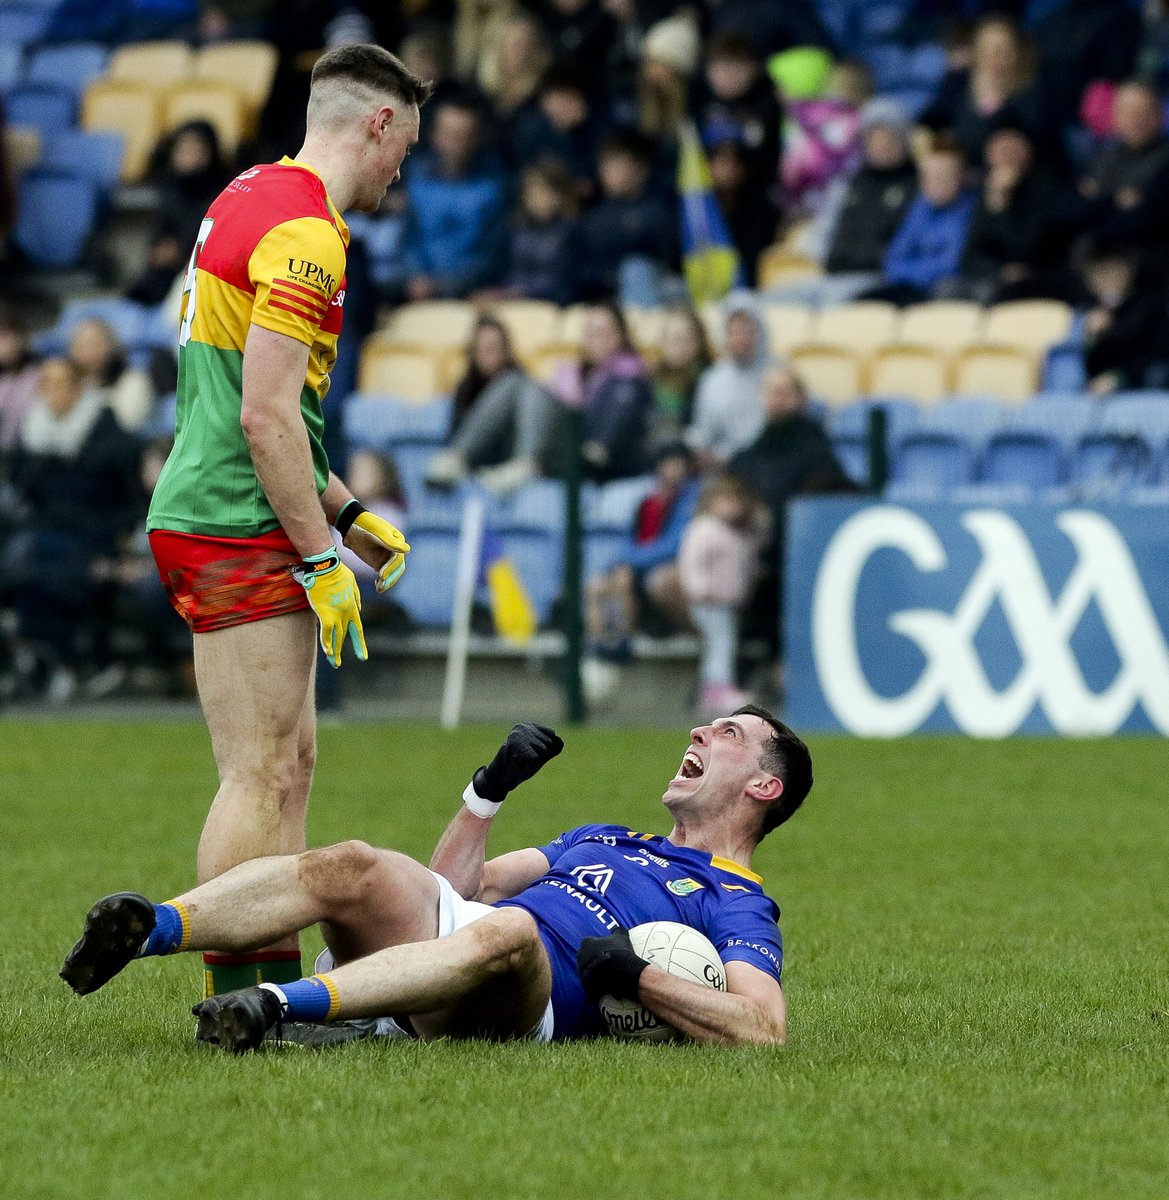 09-04-2023. Wicklow captain Padraig O'Toole makes his feelings clear to Carlow's Seanie Bambrick during the Wicklow v Carlow Leinster SFC 1st round, Echelon park, Aughrim. Great win for McConville's Blue army 2-12 to 0-10. All Photographs: Garry O'Neill. #CapturingHistory @PPAI